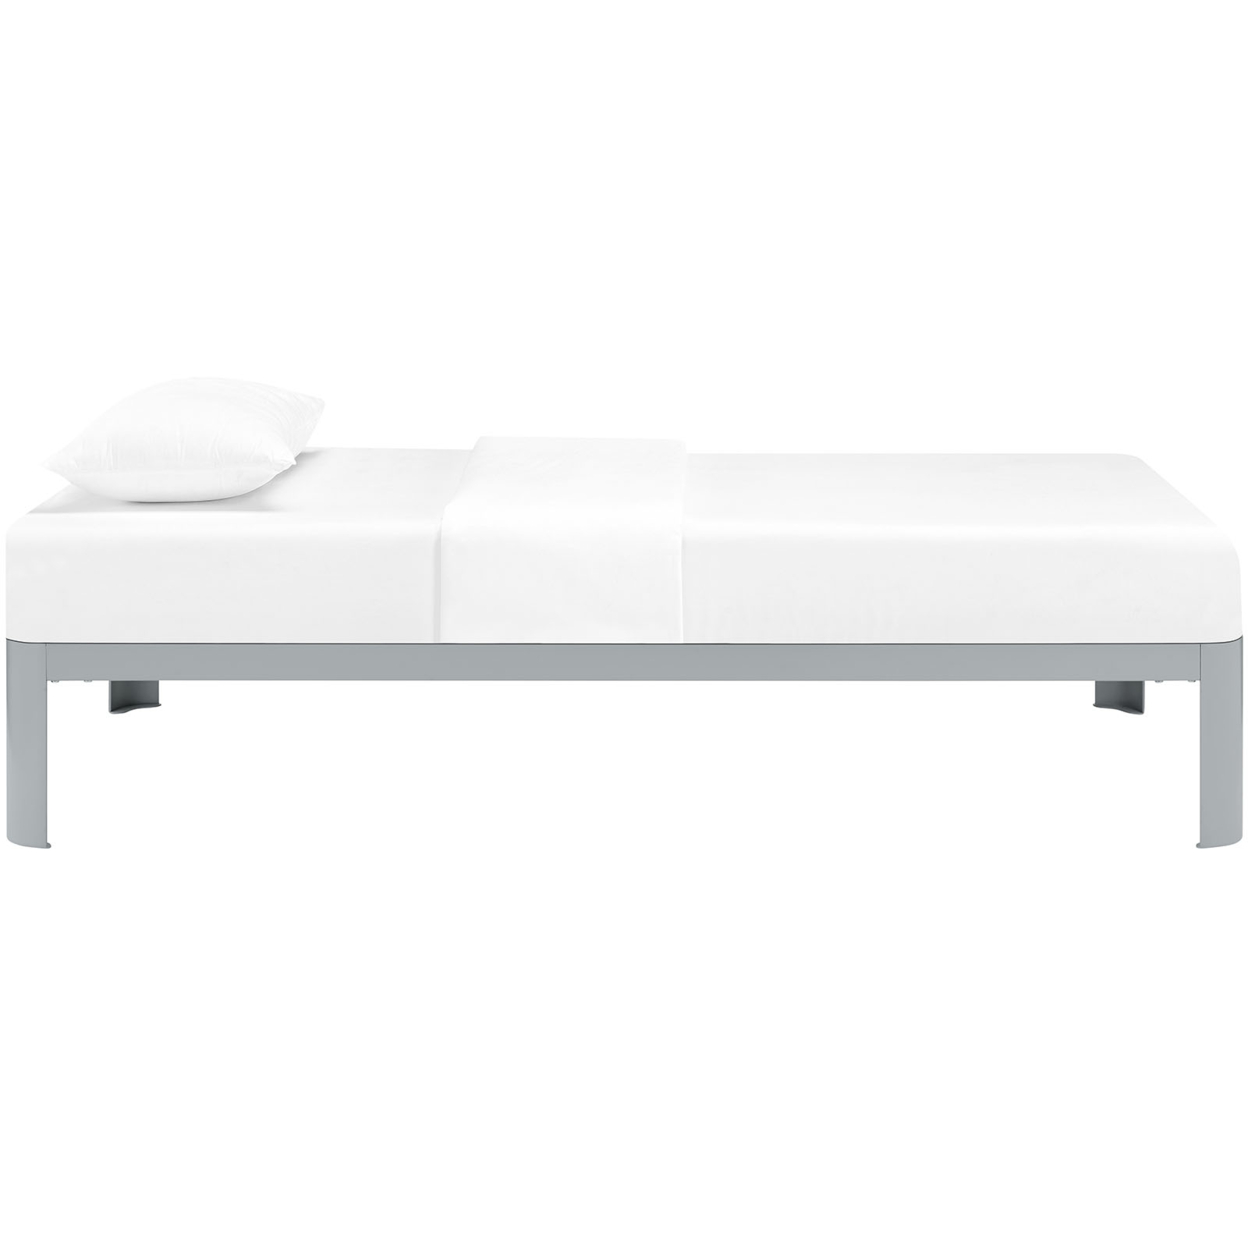 Corinne Twin Bed Frame, Gray